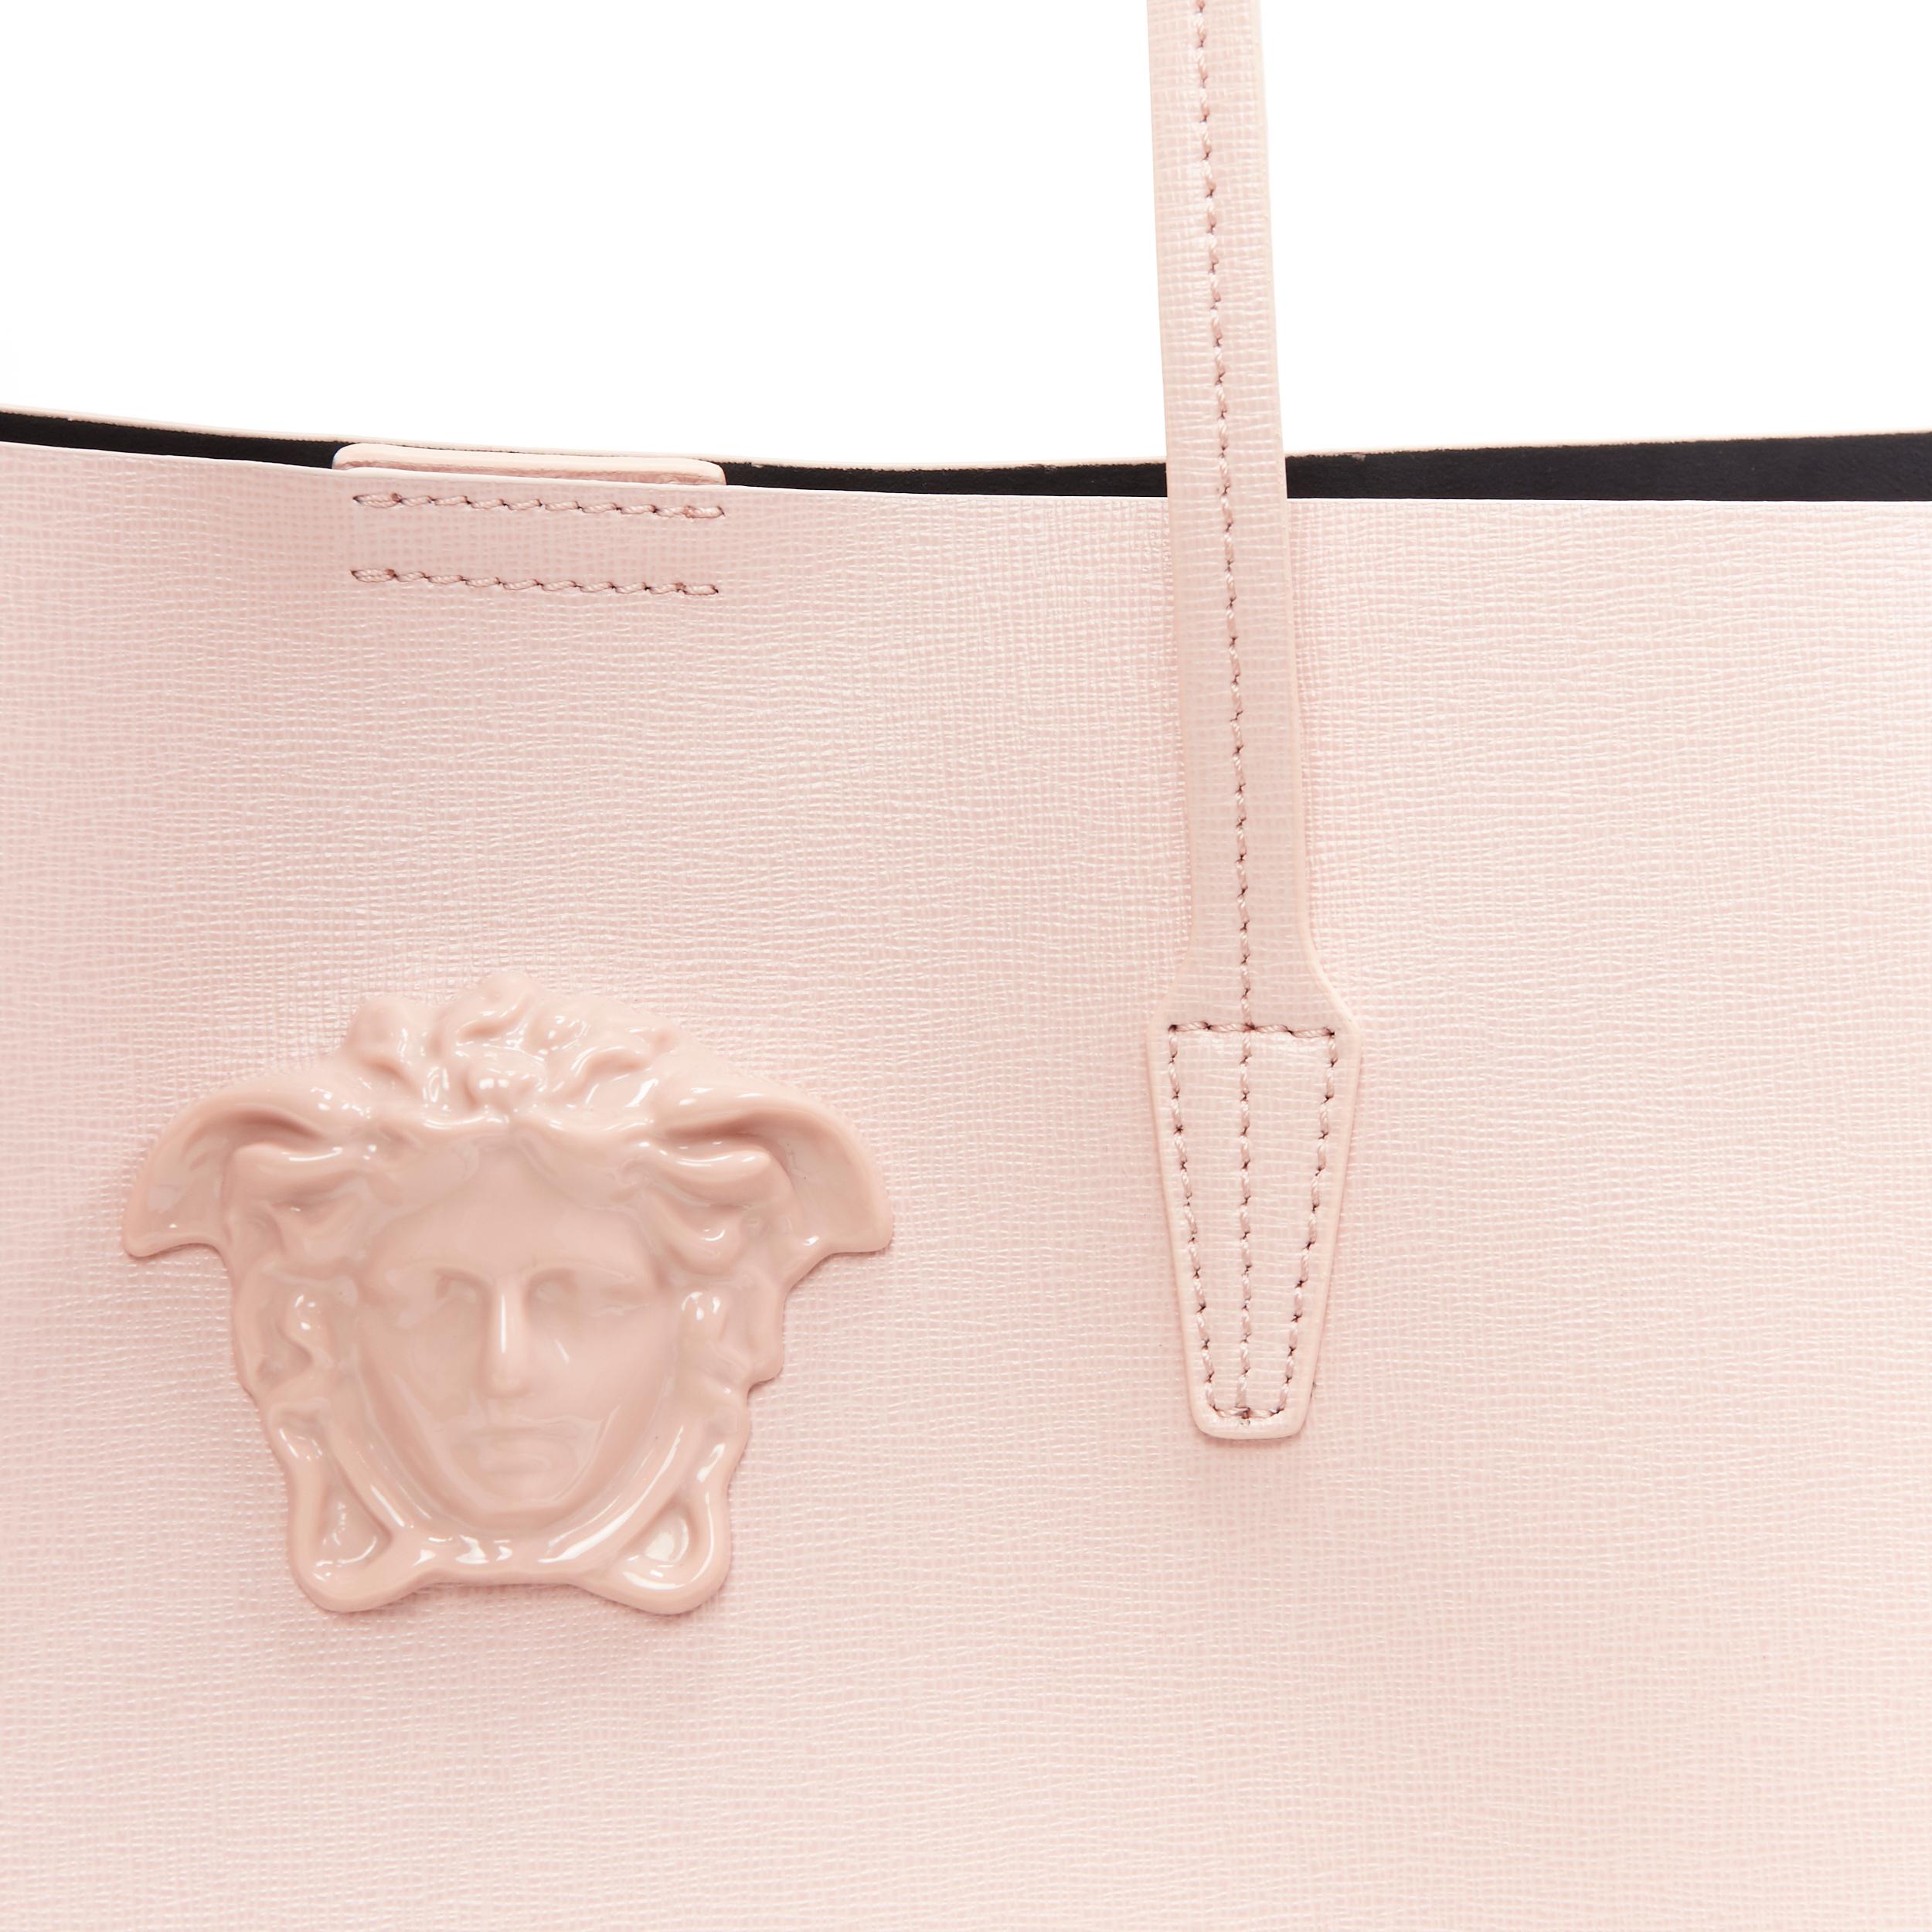 Women's new VERSACE Palazzo Medusa light pink saffiano leather large neverfull tote bag